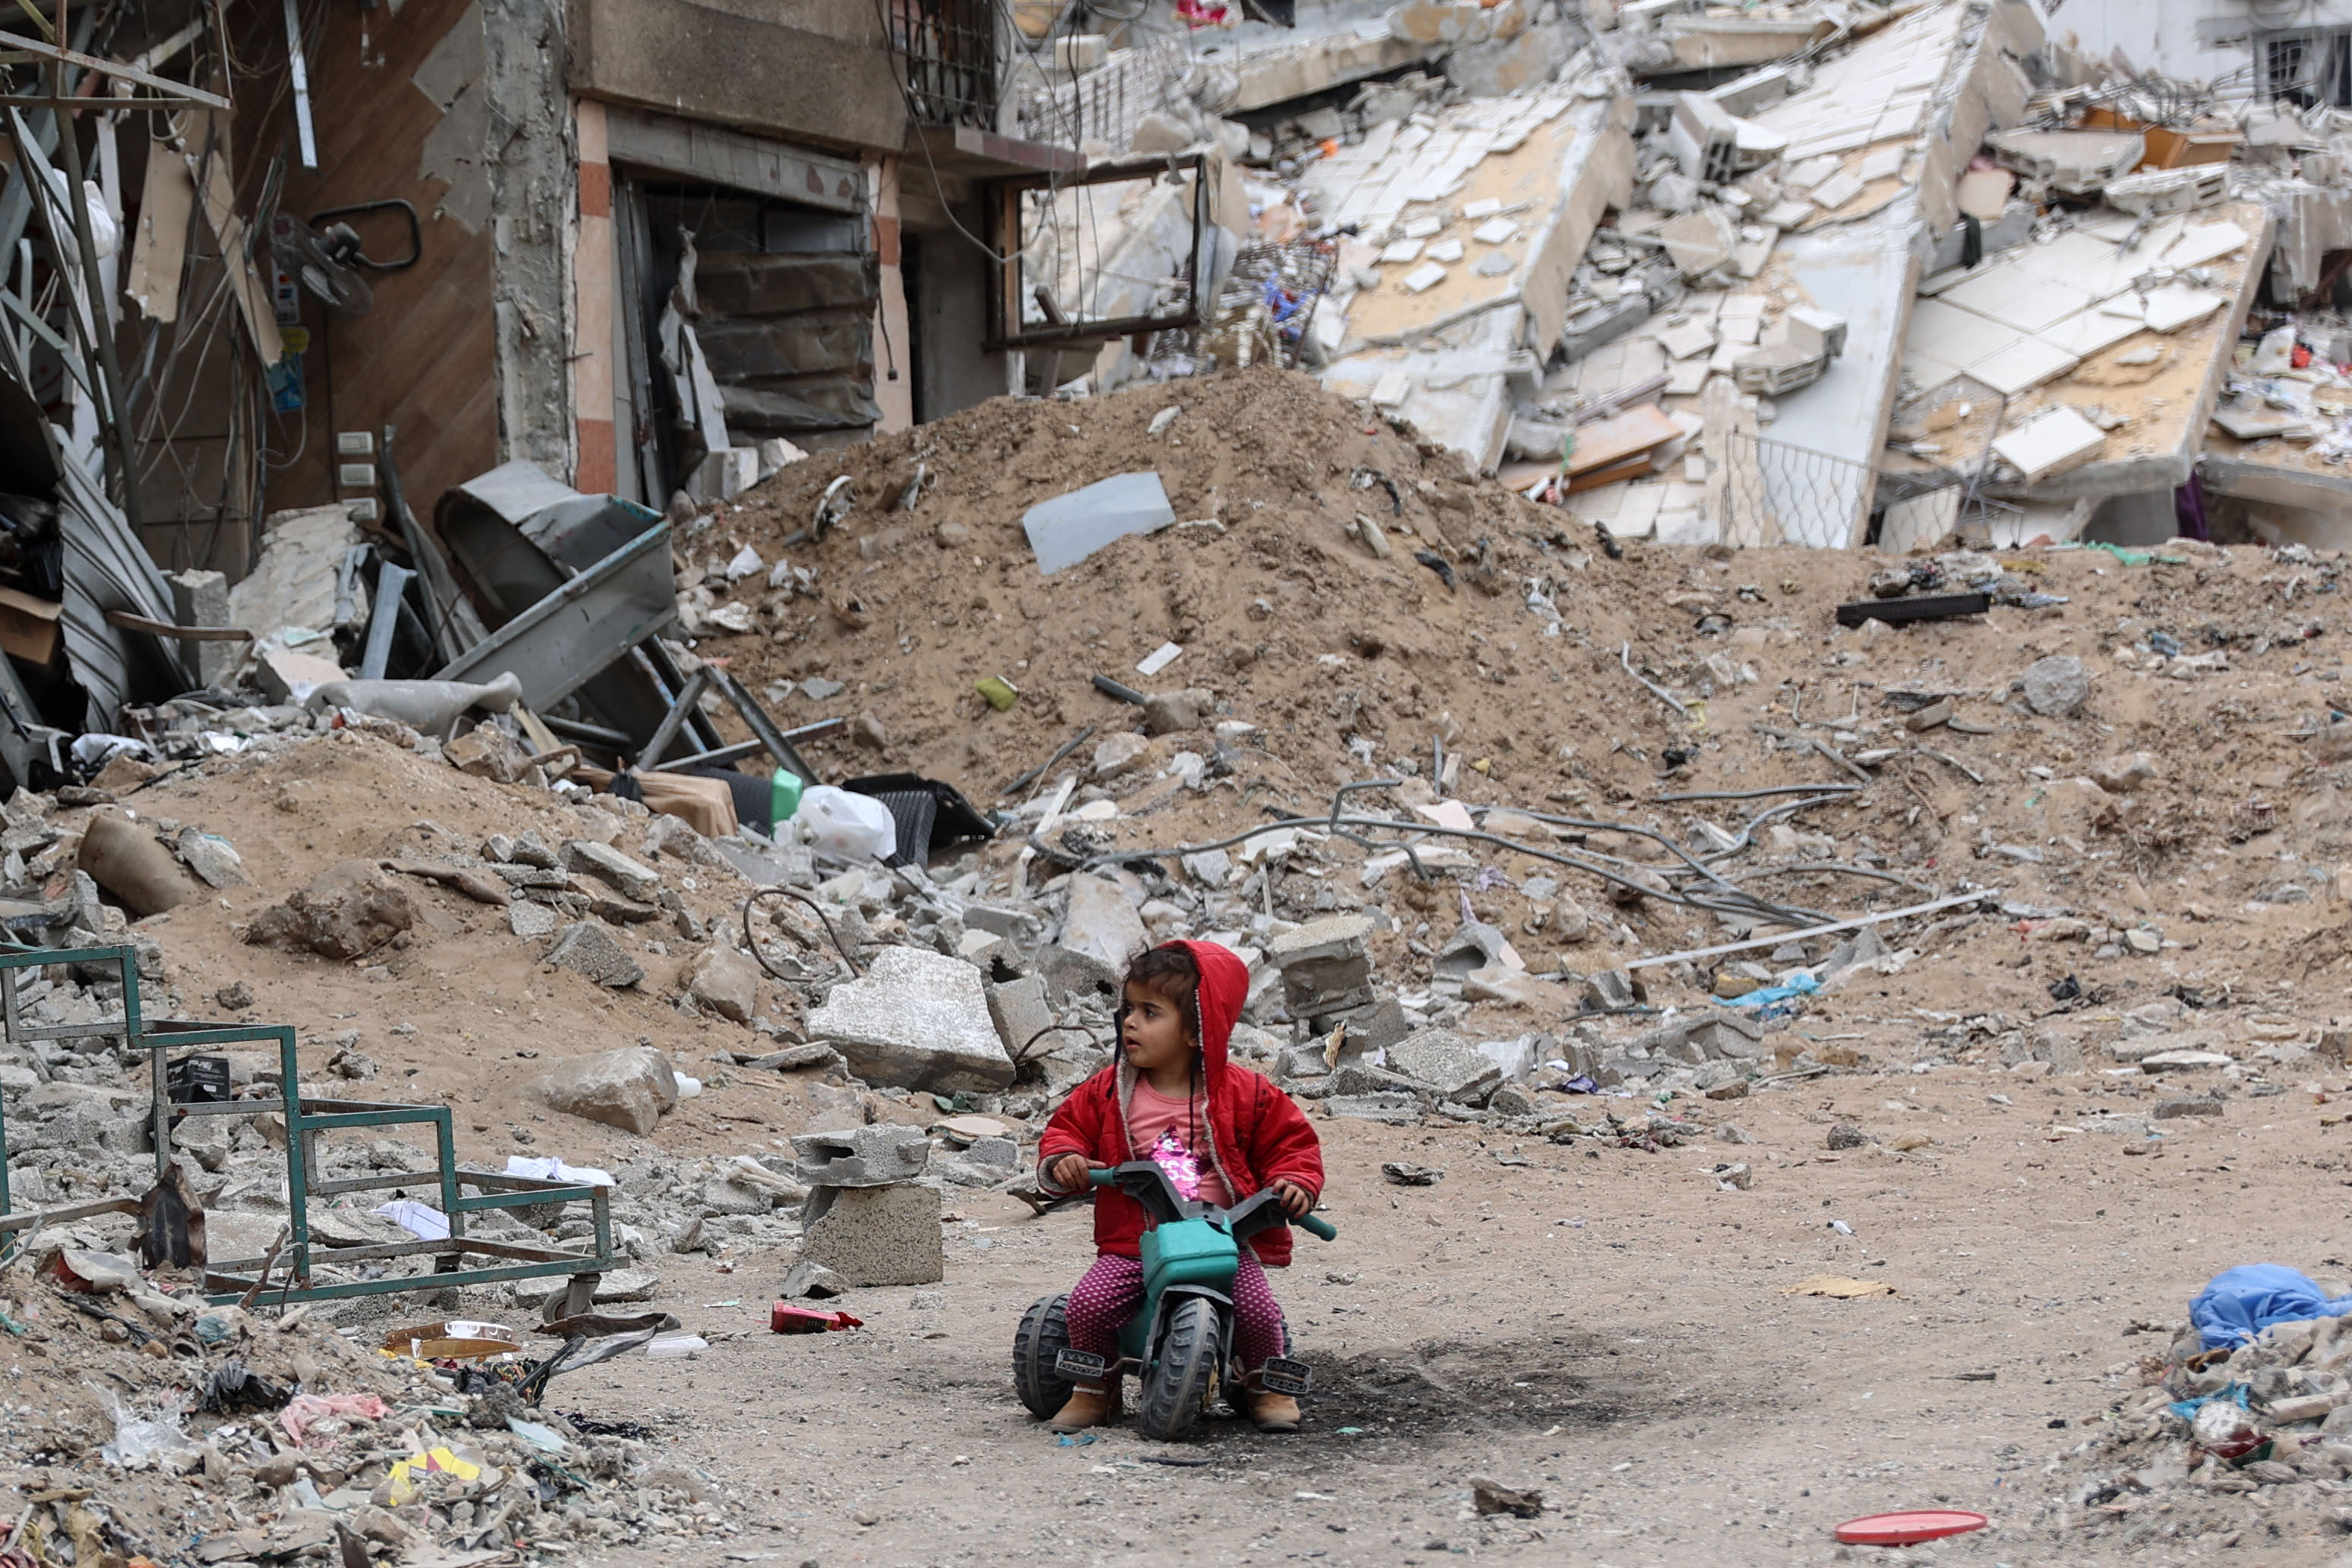 A Palestinian child plays near a building destroyed by earlier Israeli bombardment in Gaza City on April 8.